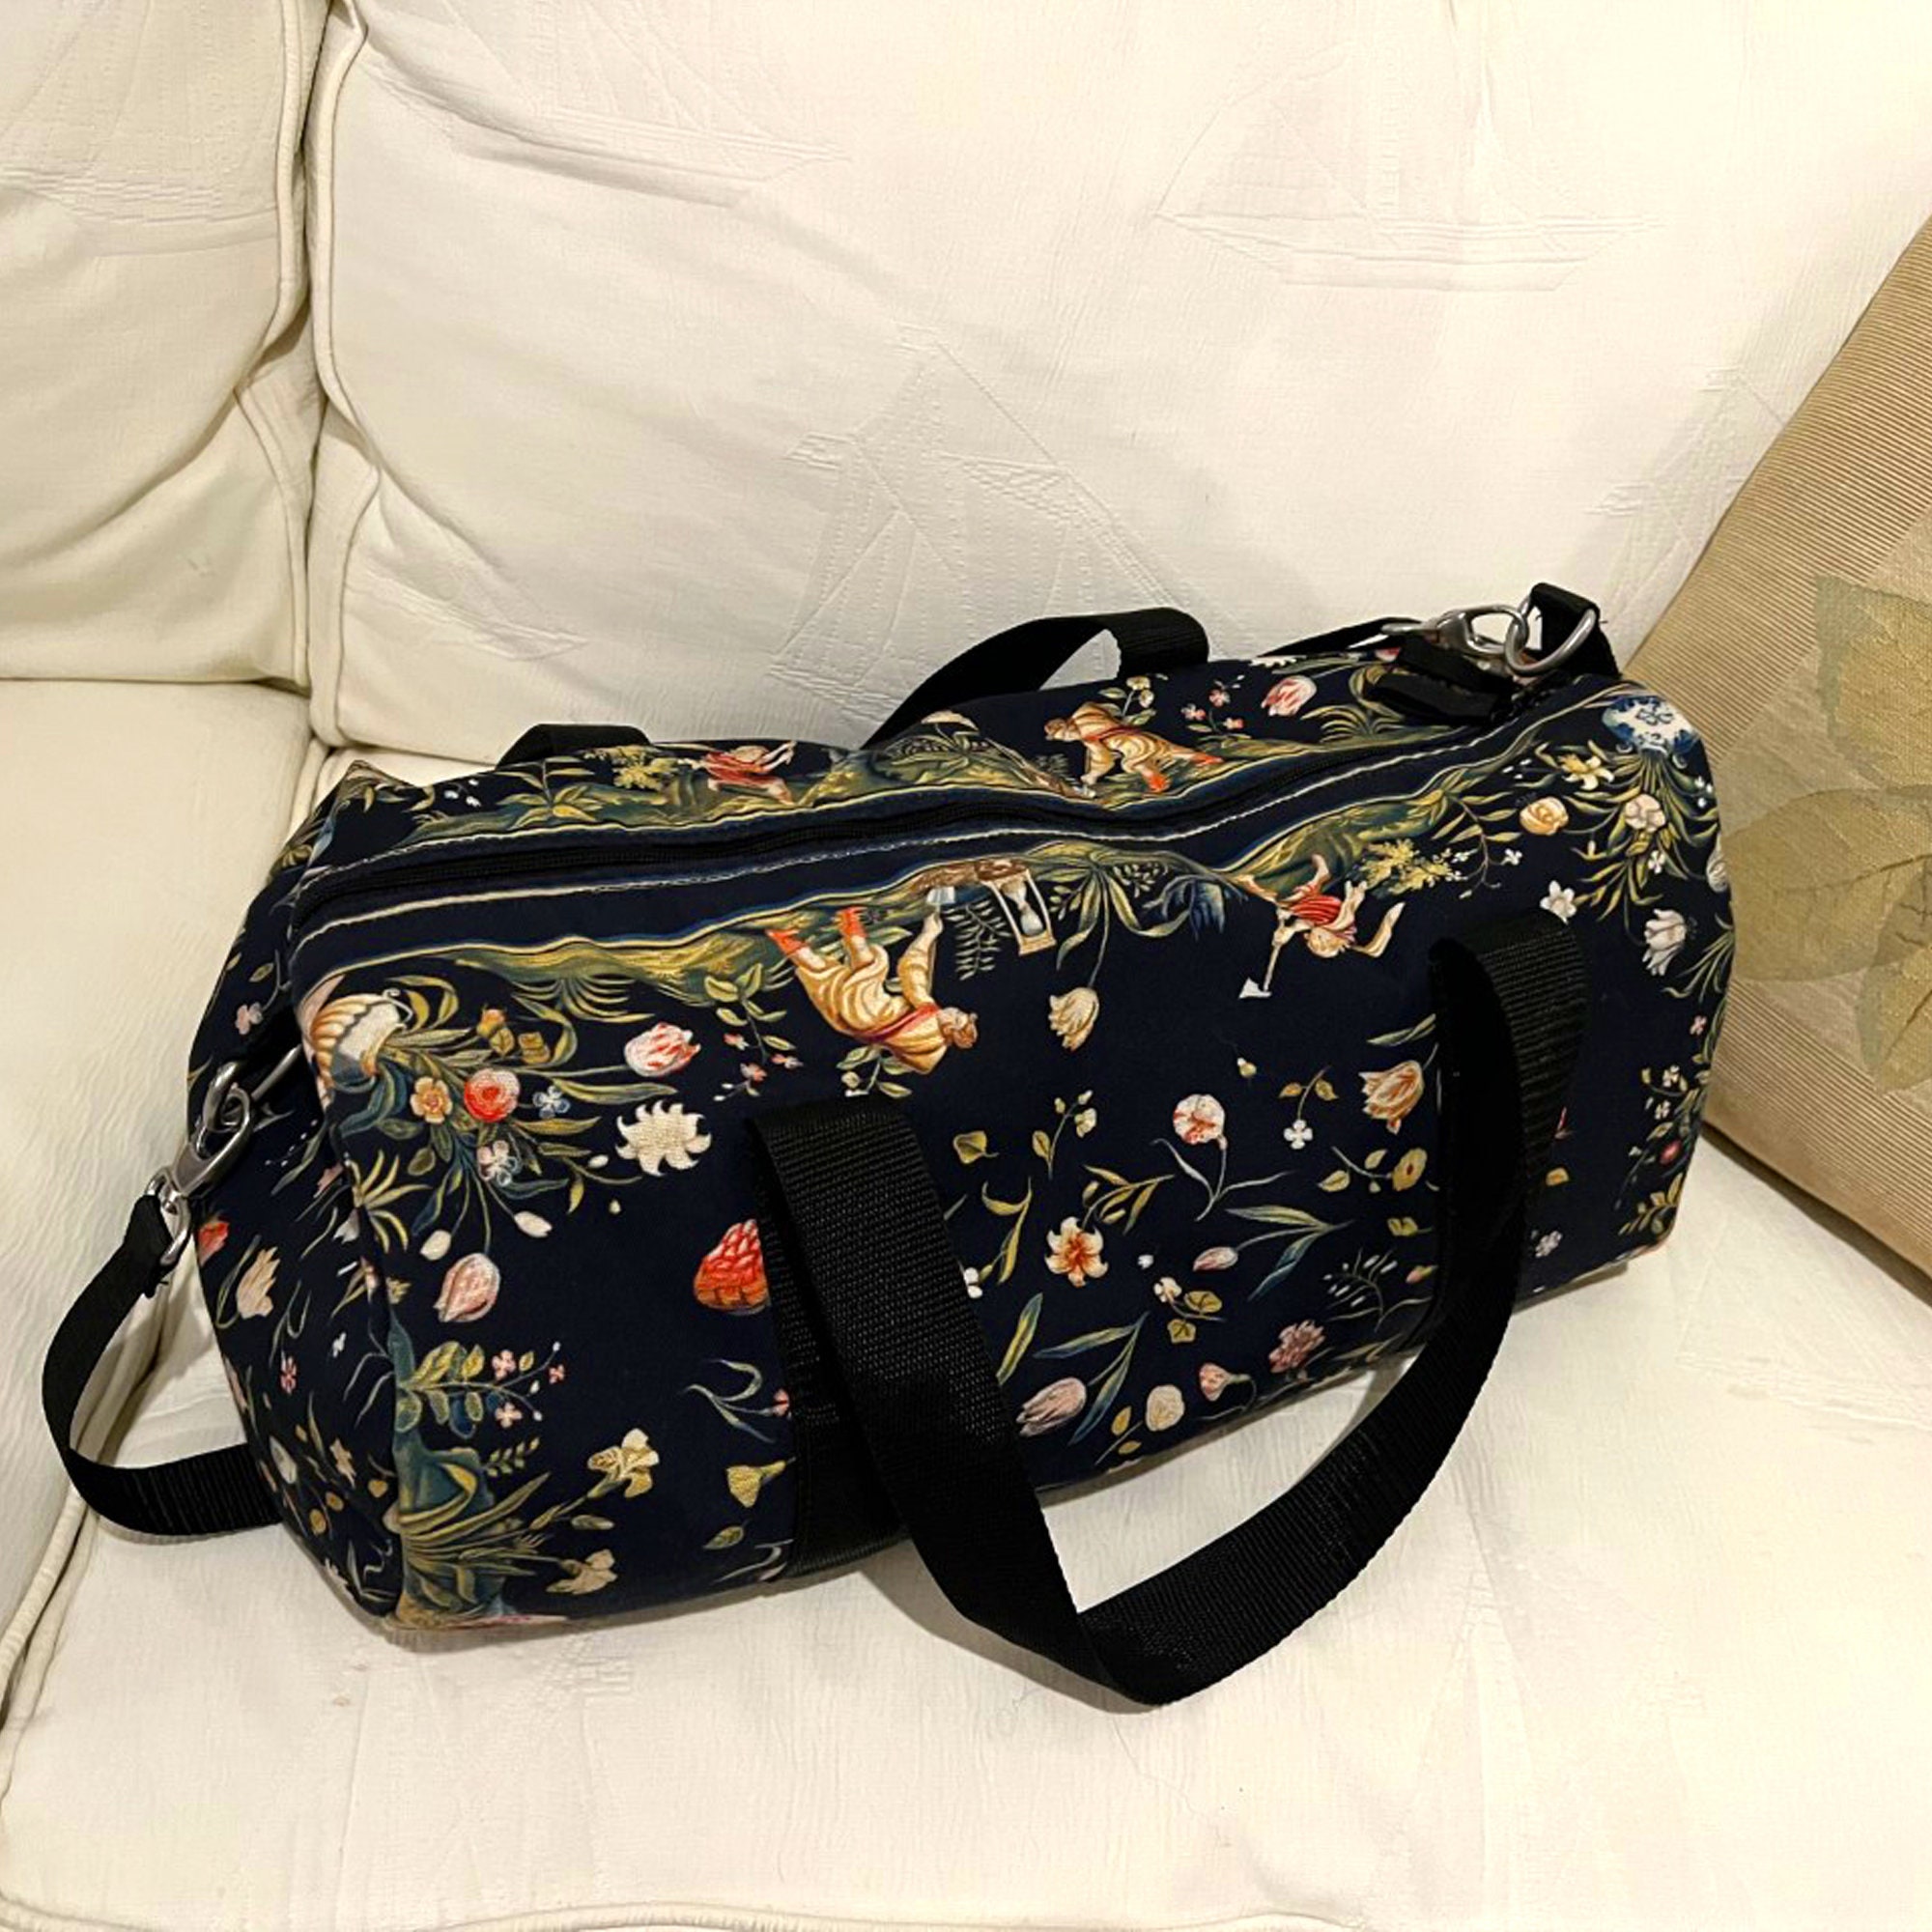 Signare Tapestry Large Travel Duffle Bag Ladies Overnight Weekender Carryon  Gym Sports Duffel bags for Women with Willow Bough Design (BHOLD-WIOW)